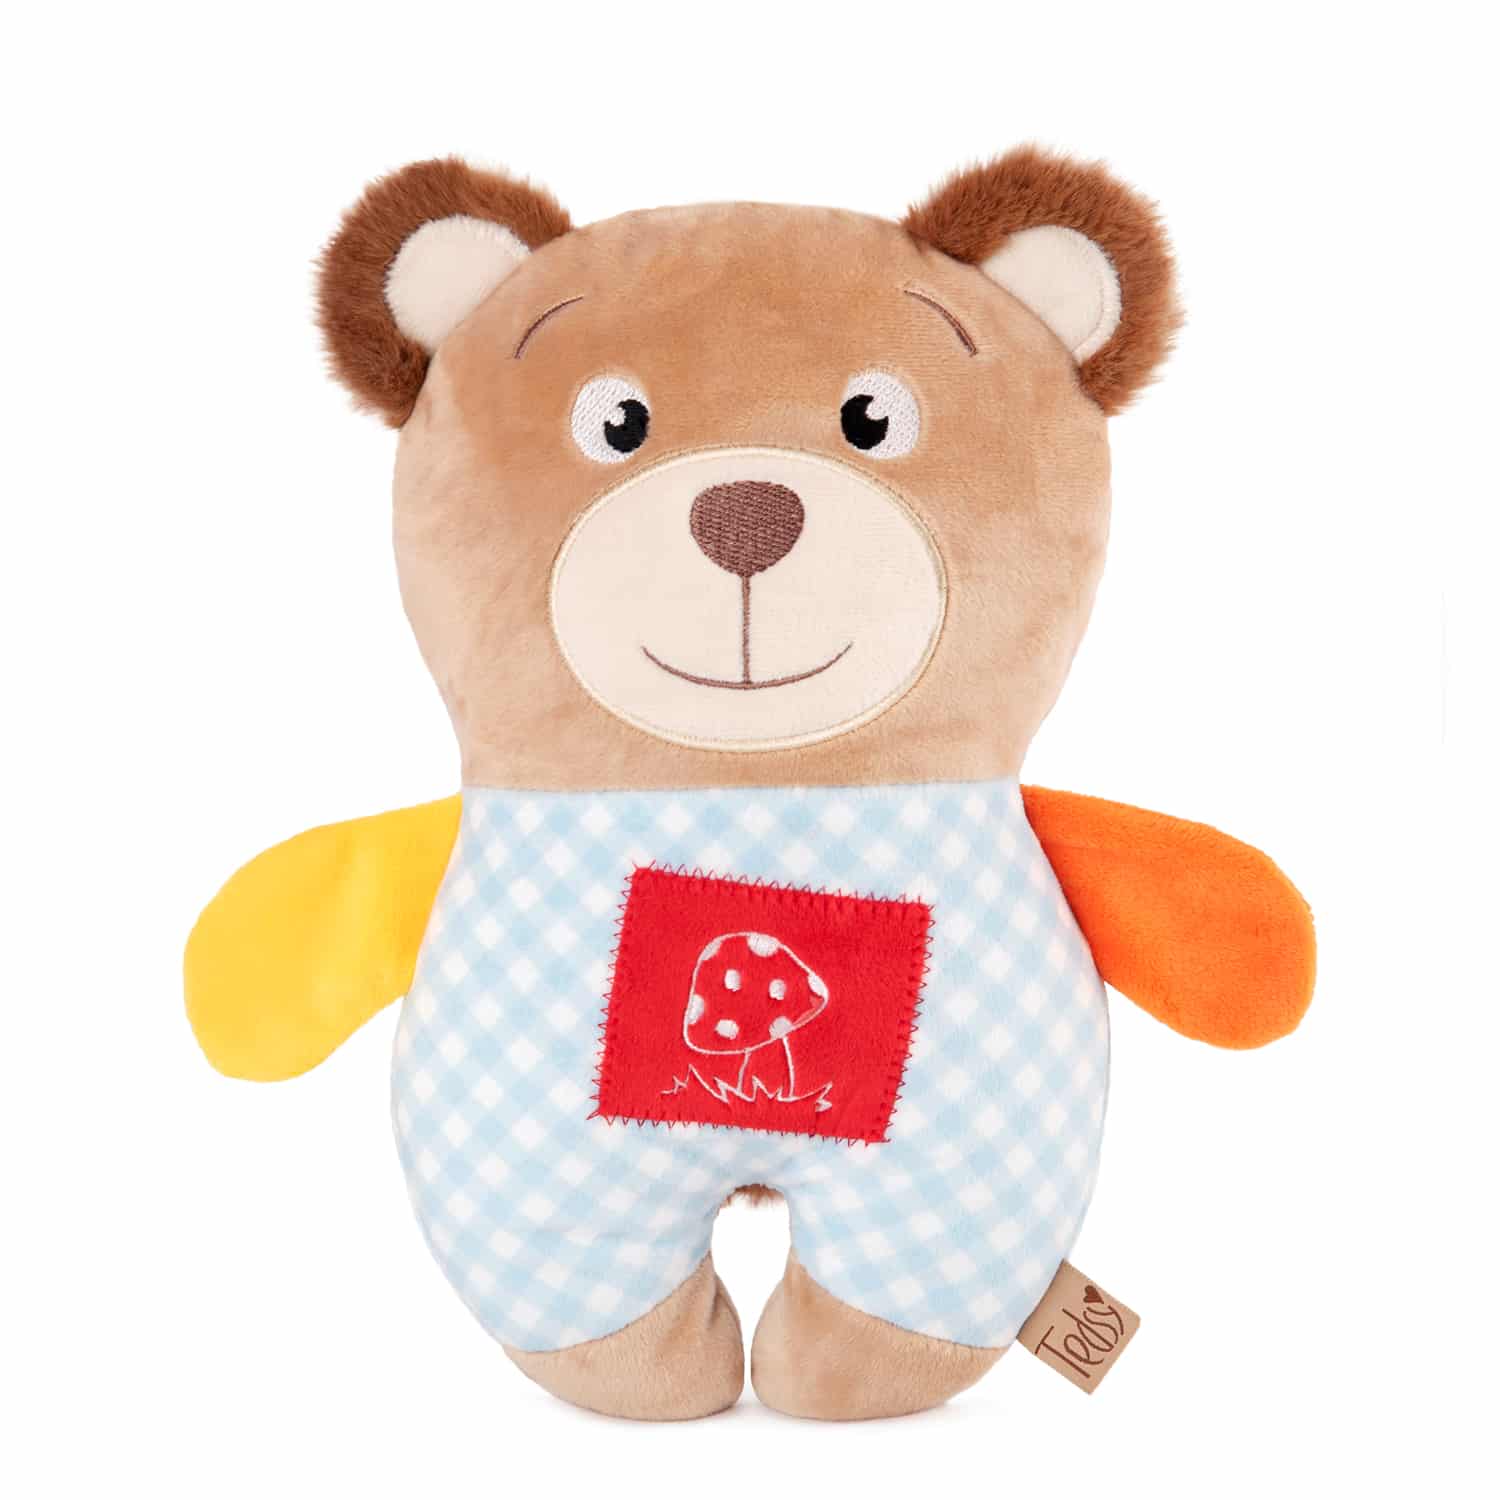 Baby plush toy with cherry stones BEAR